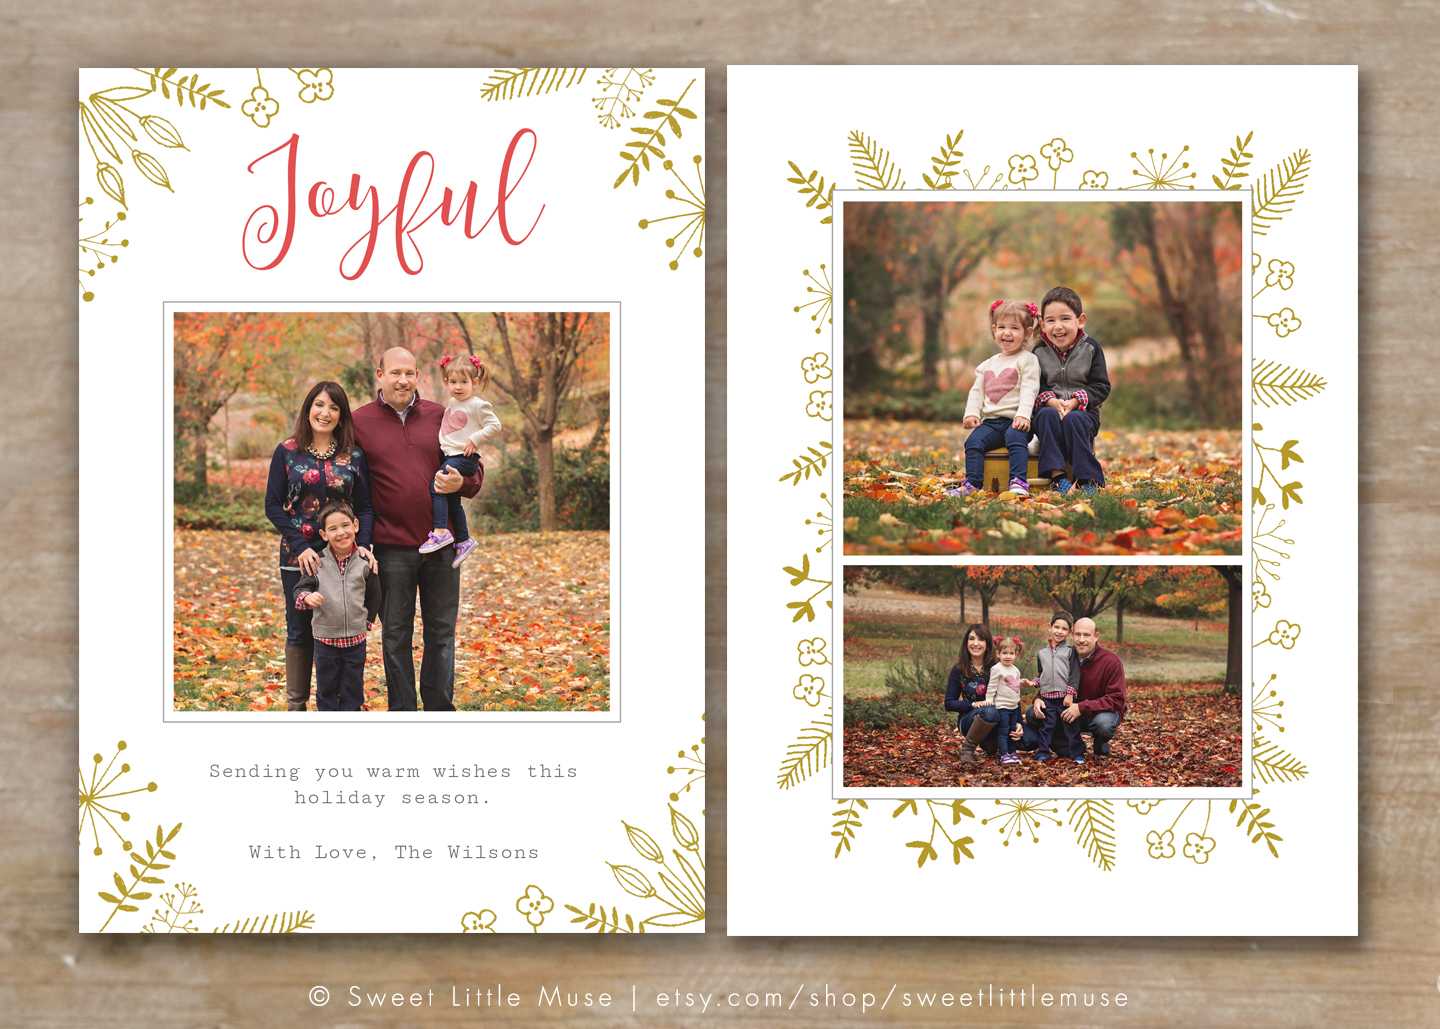 30 Holiday Card Templates For Photographers To Use This Year With Regard To Holiday Card Templates For Photographers